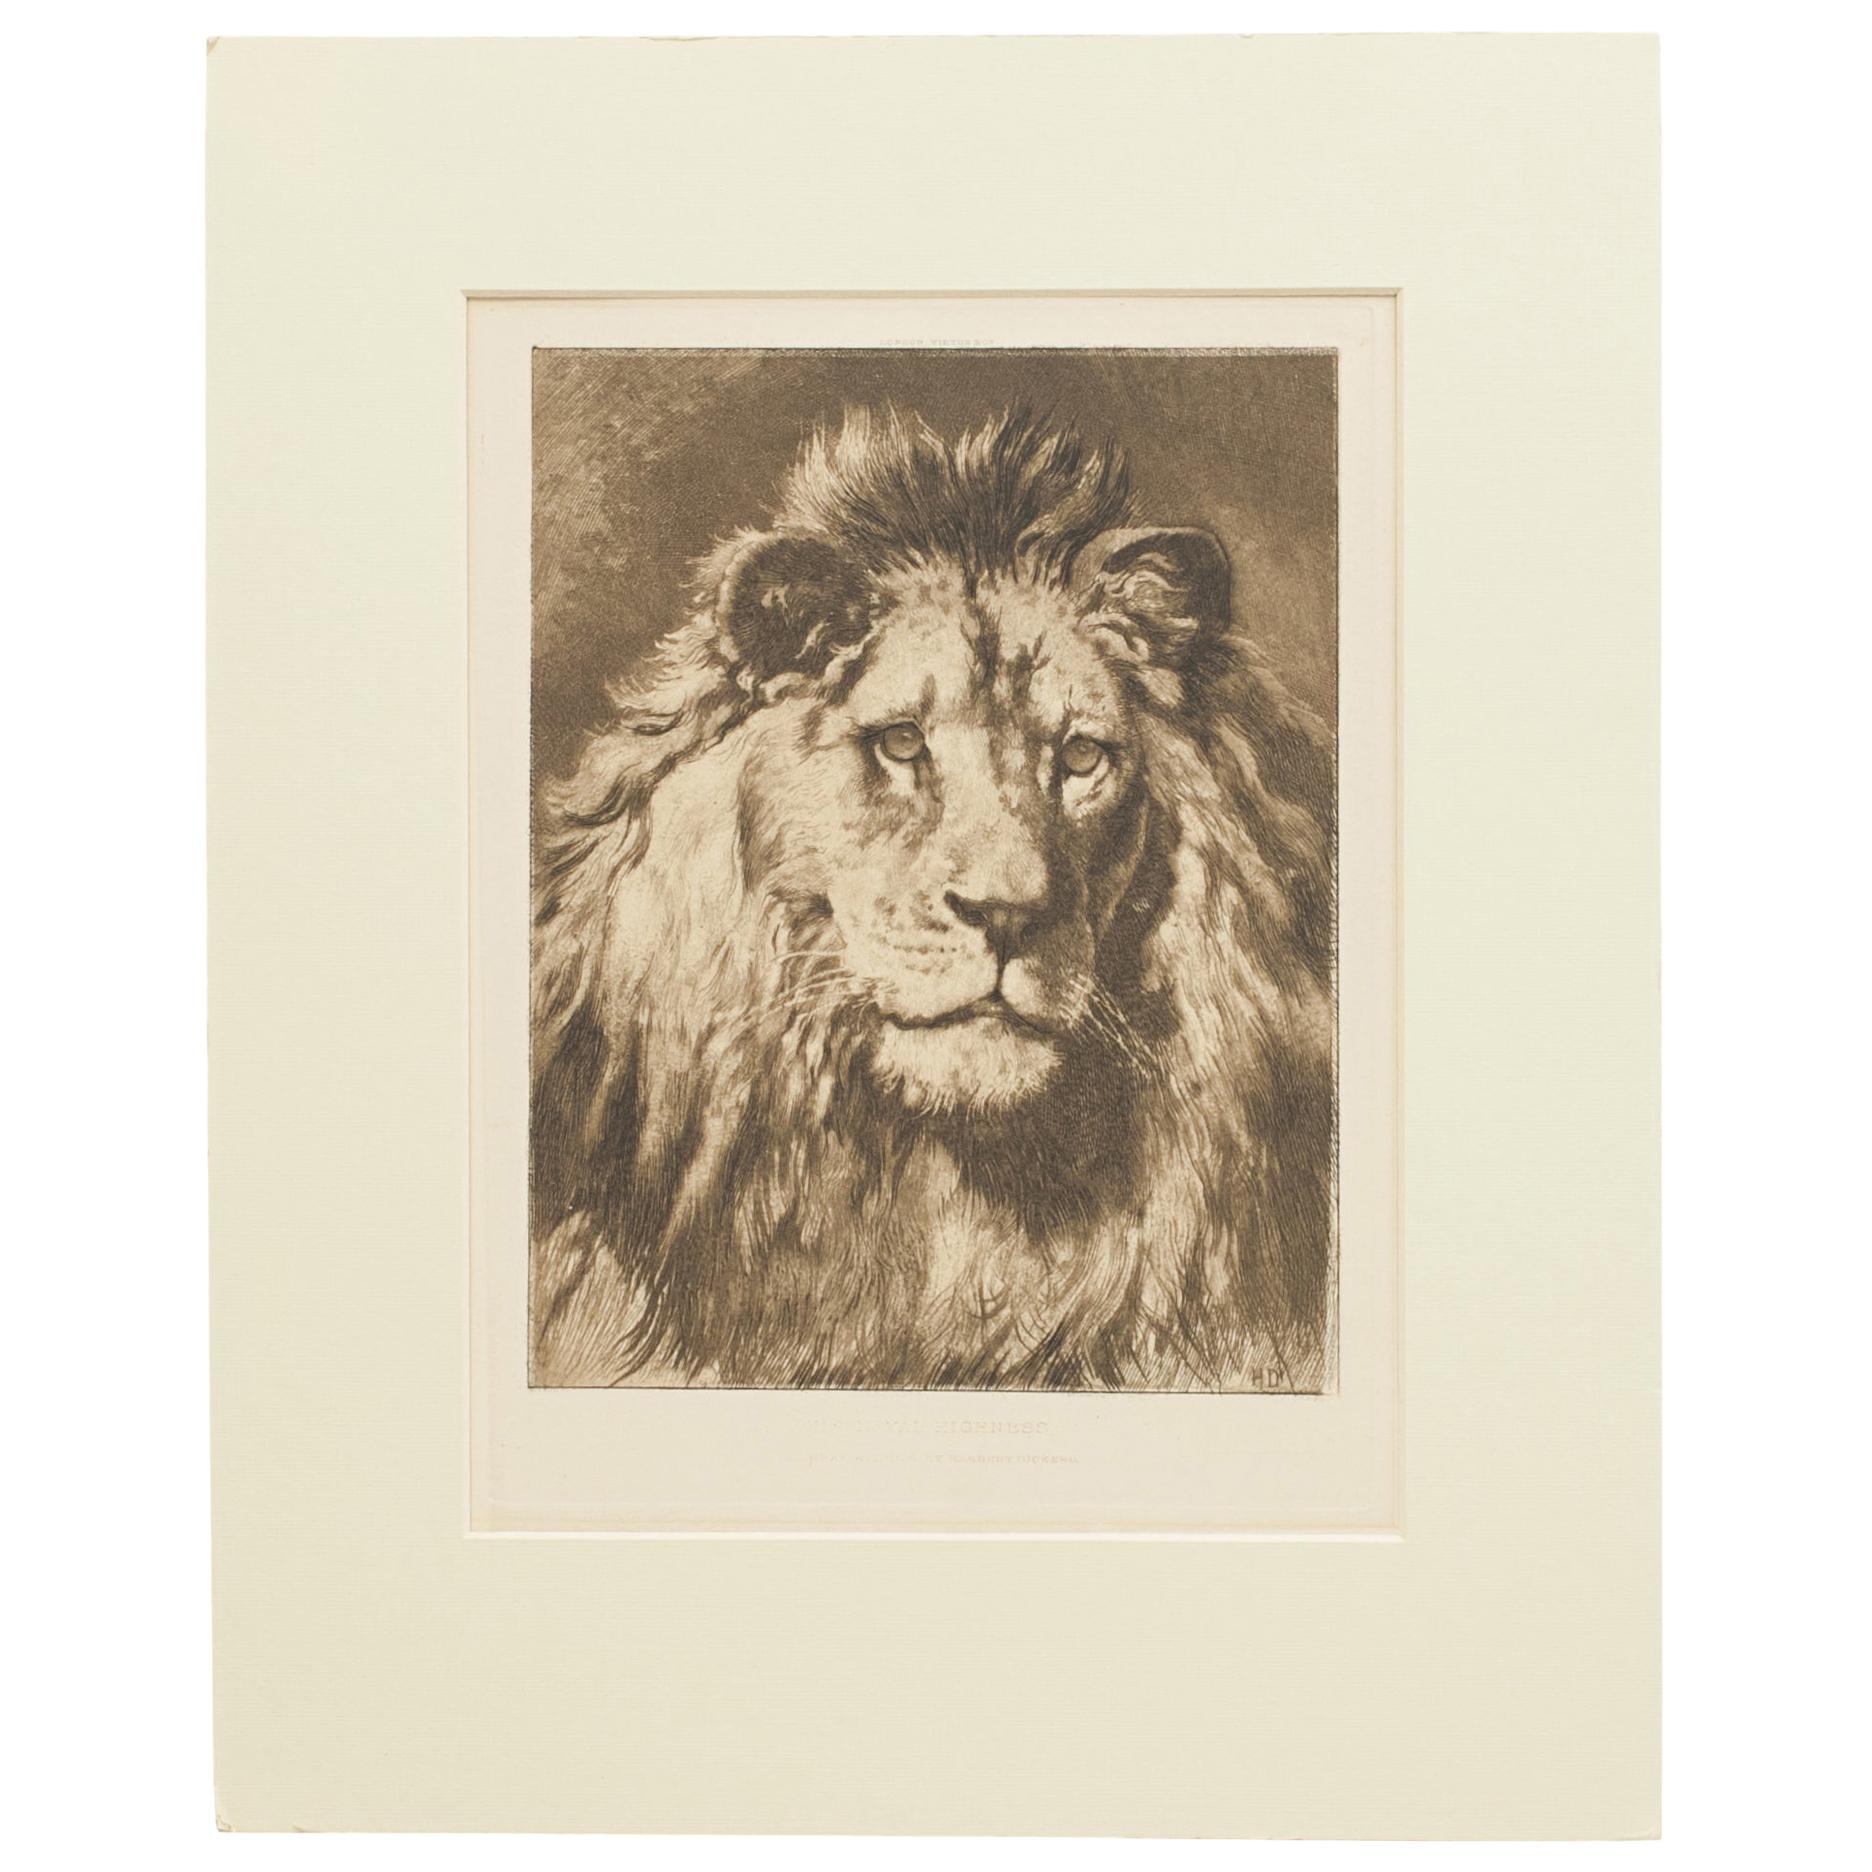 Lion Print by Herbert Dicksee, His Royal Highness